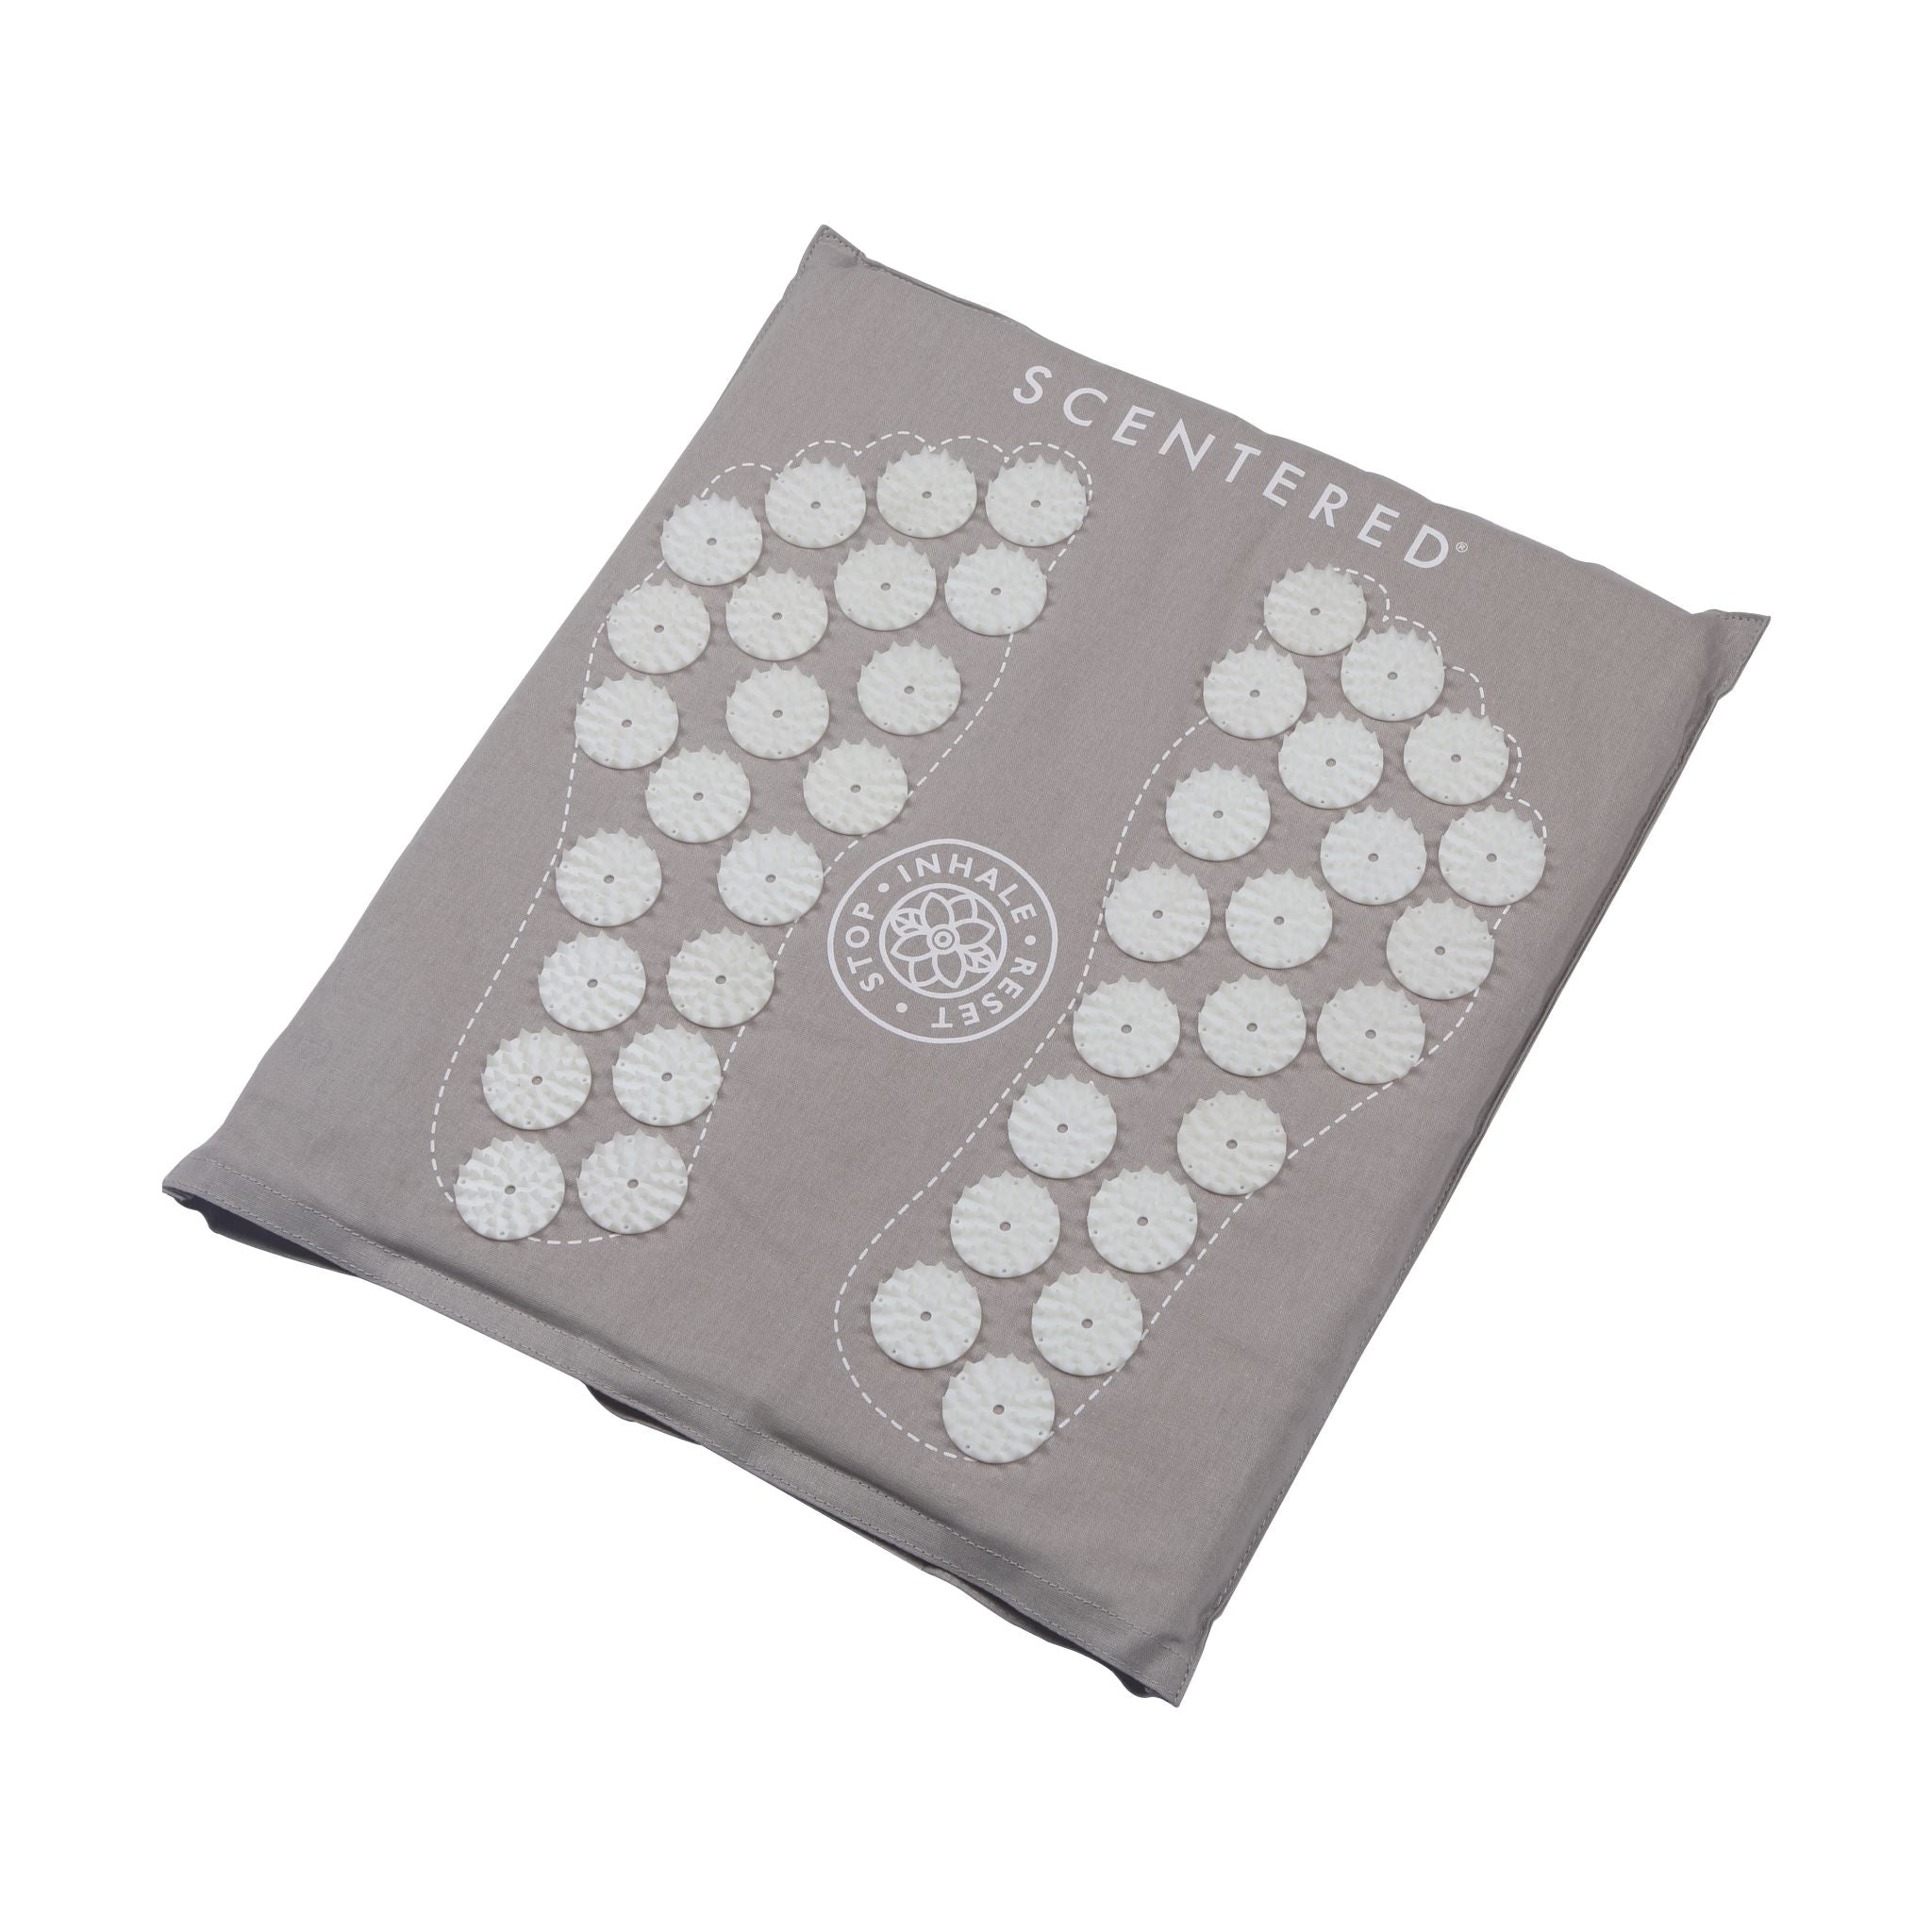 Scentered Acupressure Foot Mat Resized on a white background, the image is titled on the side